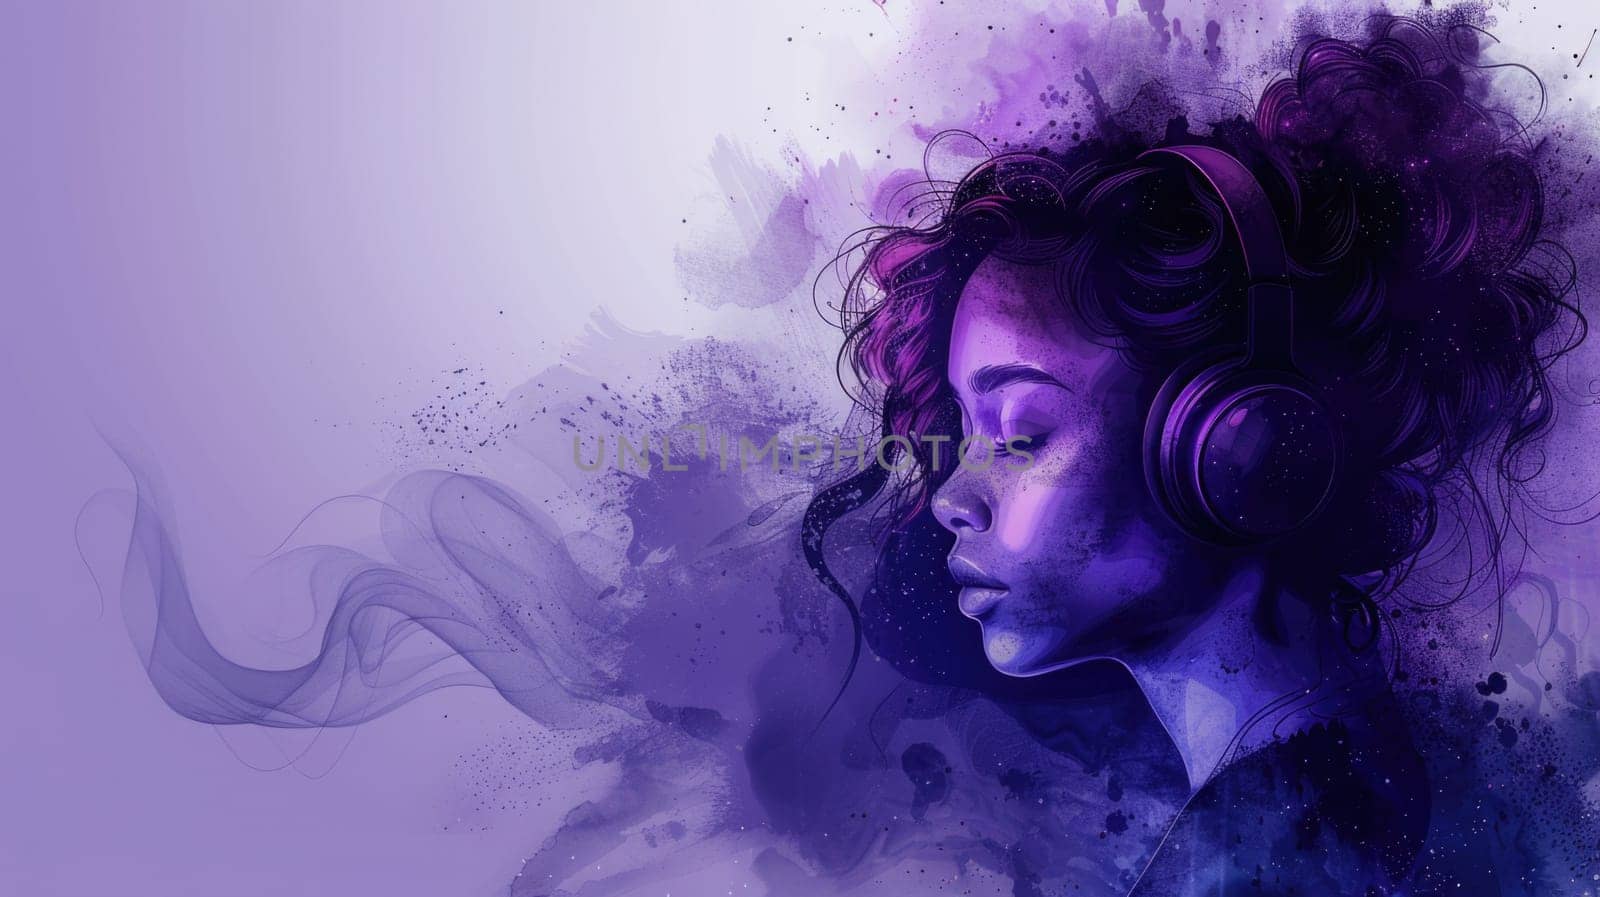 A painting of a woman wearing headphones, listening to music.